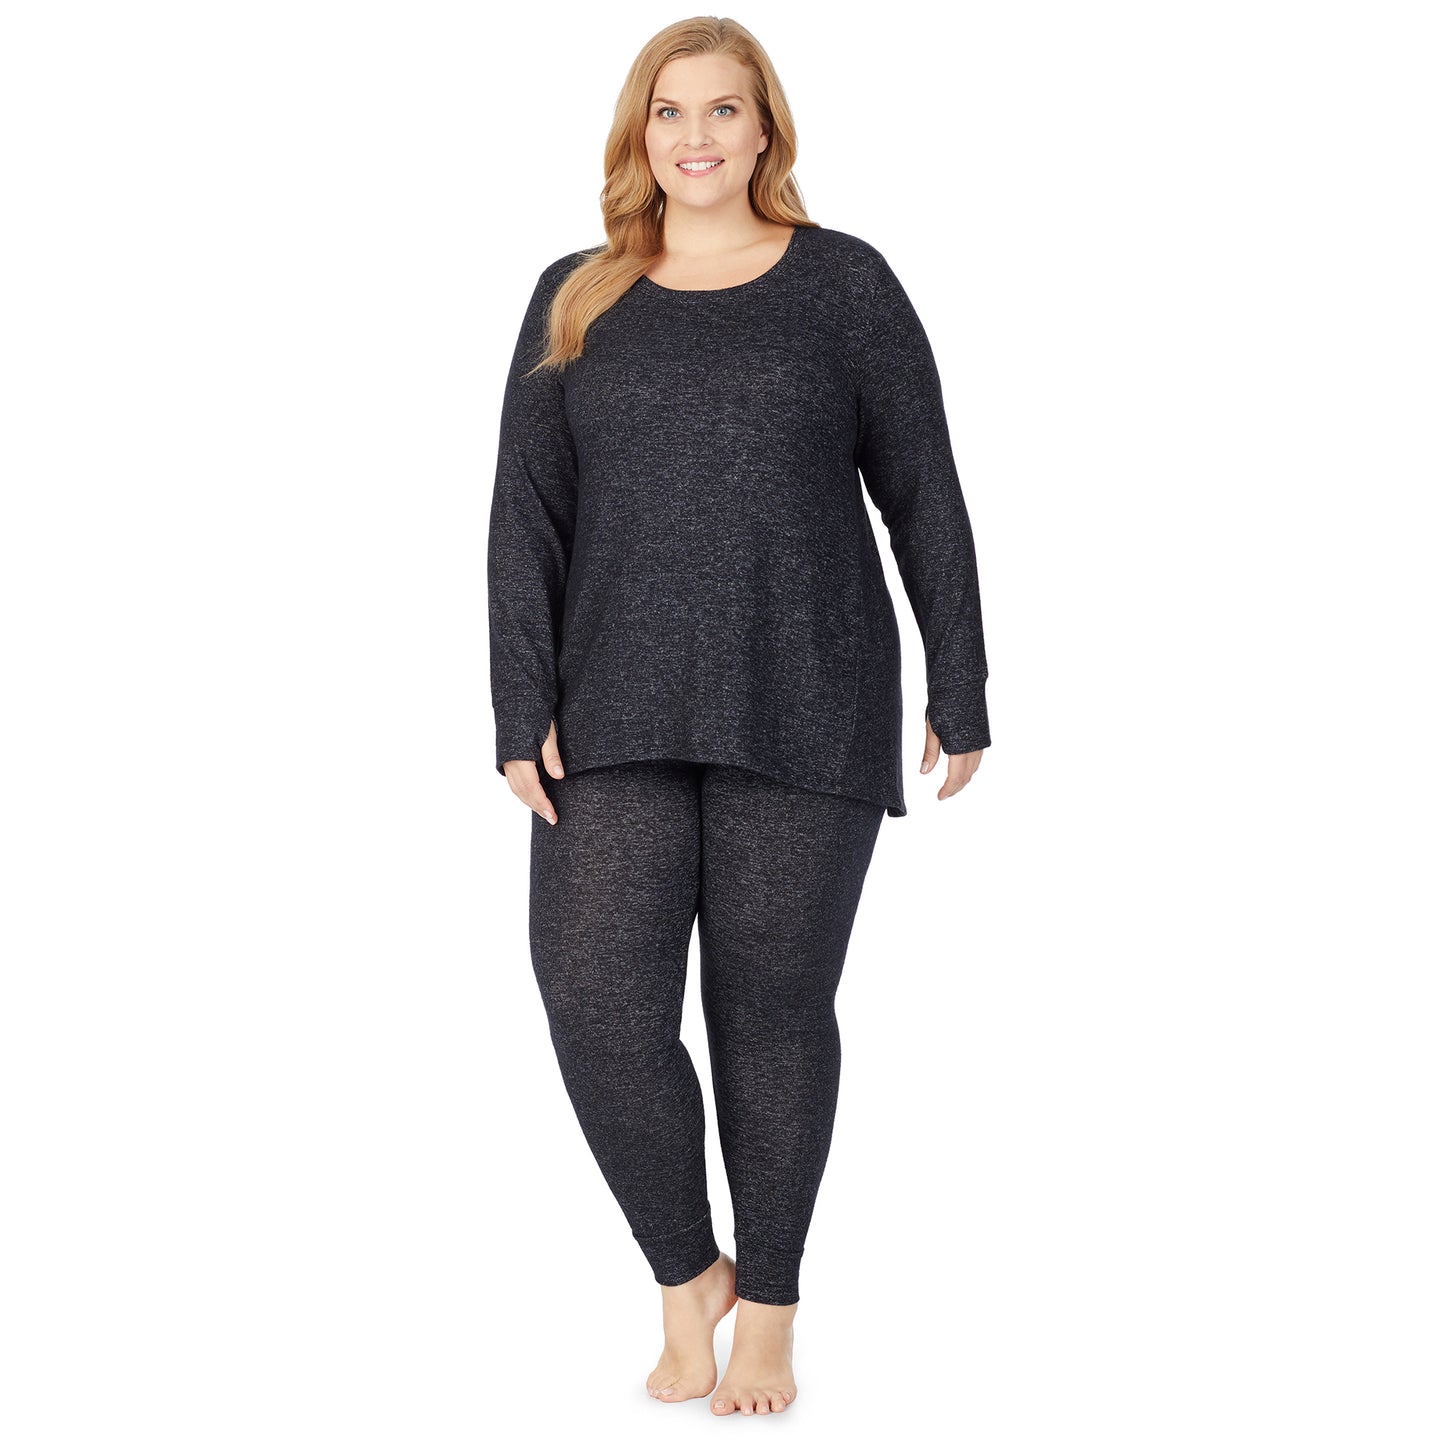 Marled Dark Charcoal; Model is wearing size 1X. She is 5'9", Bust 38", Waist 36", Hips 48.5". @A lady wearing a marled dark charcoal long sleeve tunic plus.